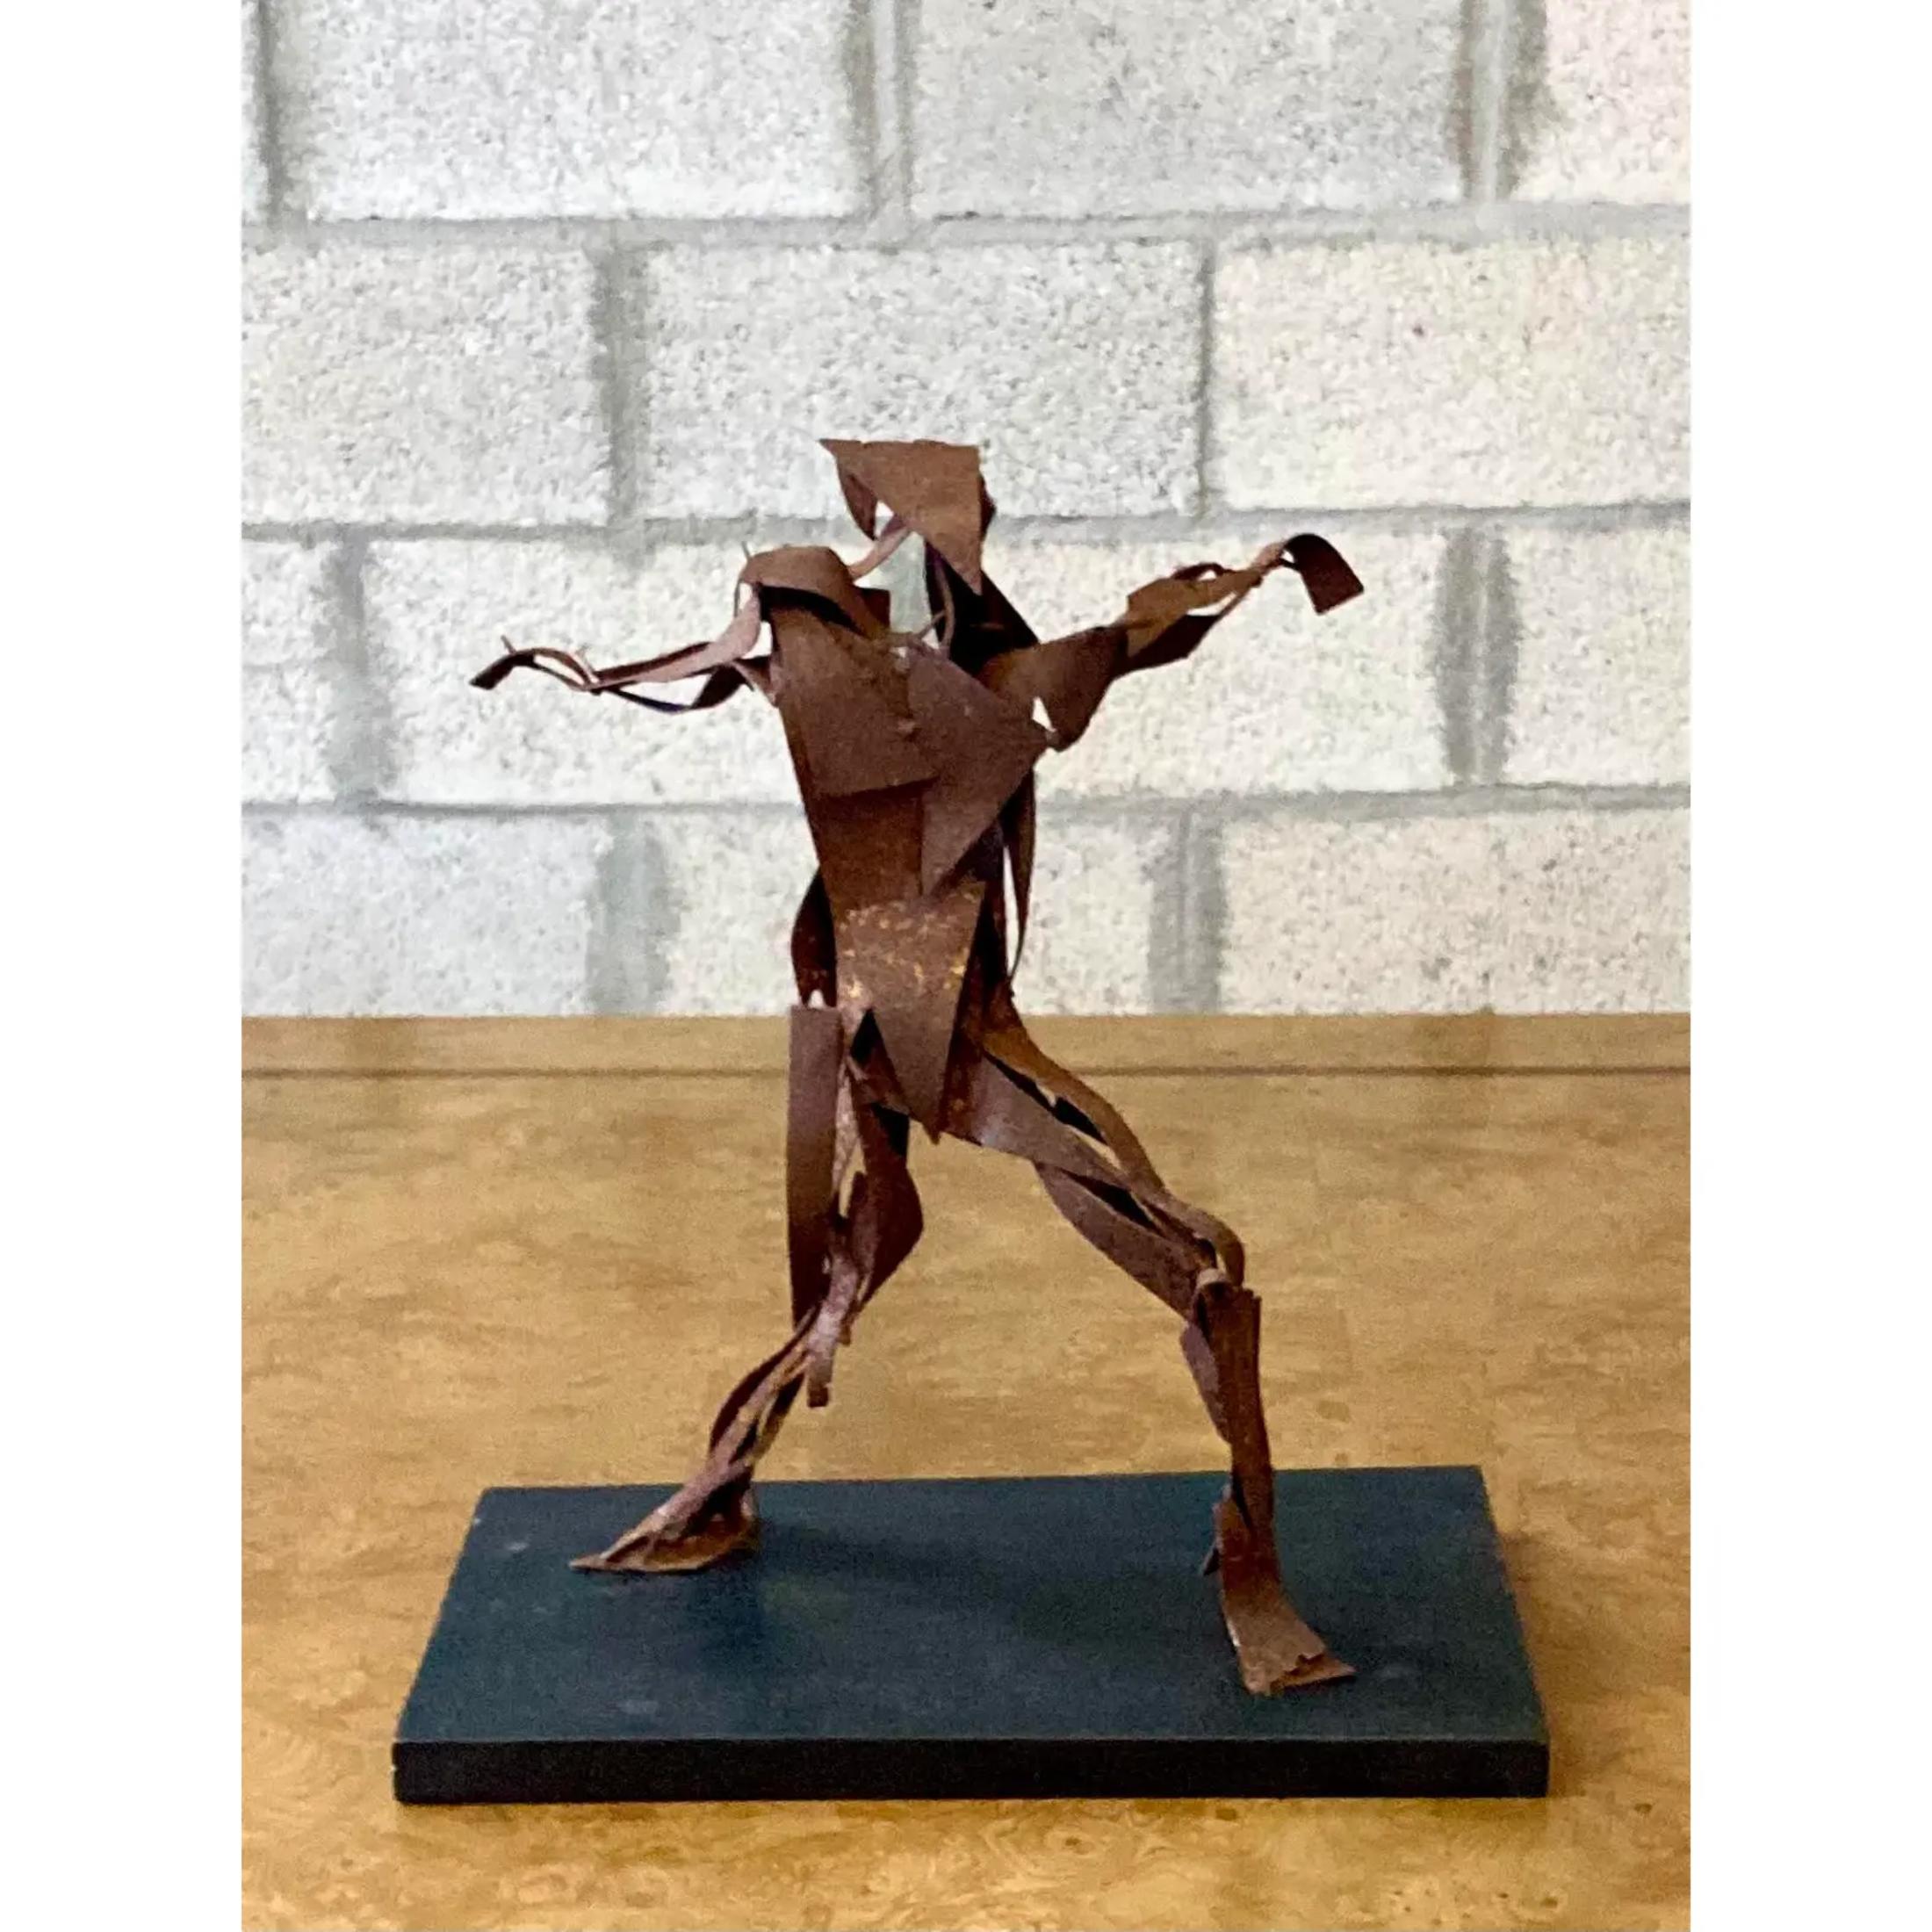 Vintage Midcentury abstract sculpture. Rusted steel in layers create the composition of a man with arms extended. Acquired from a Palm Beach estate